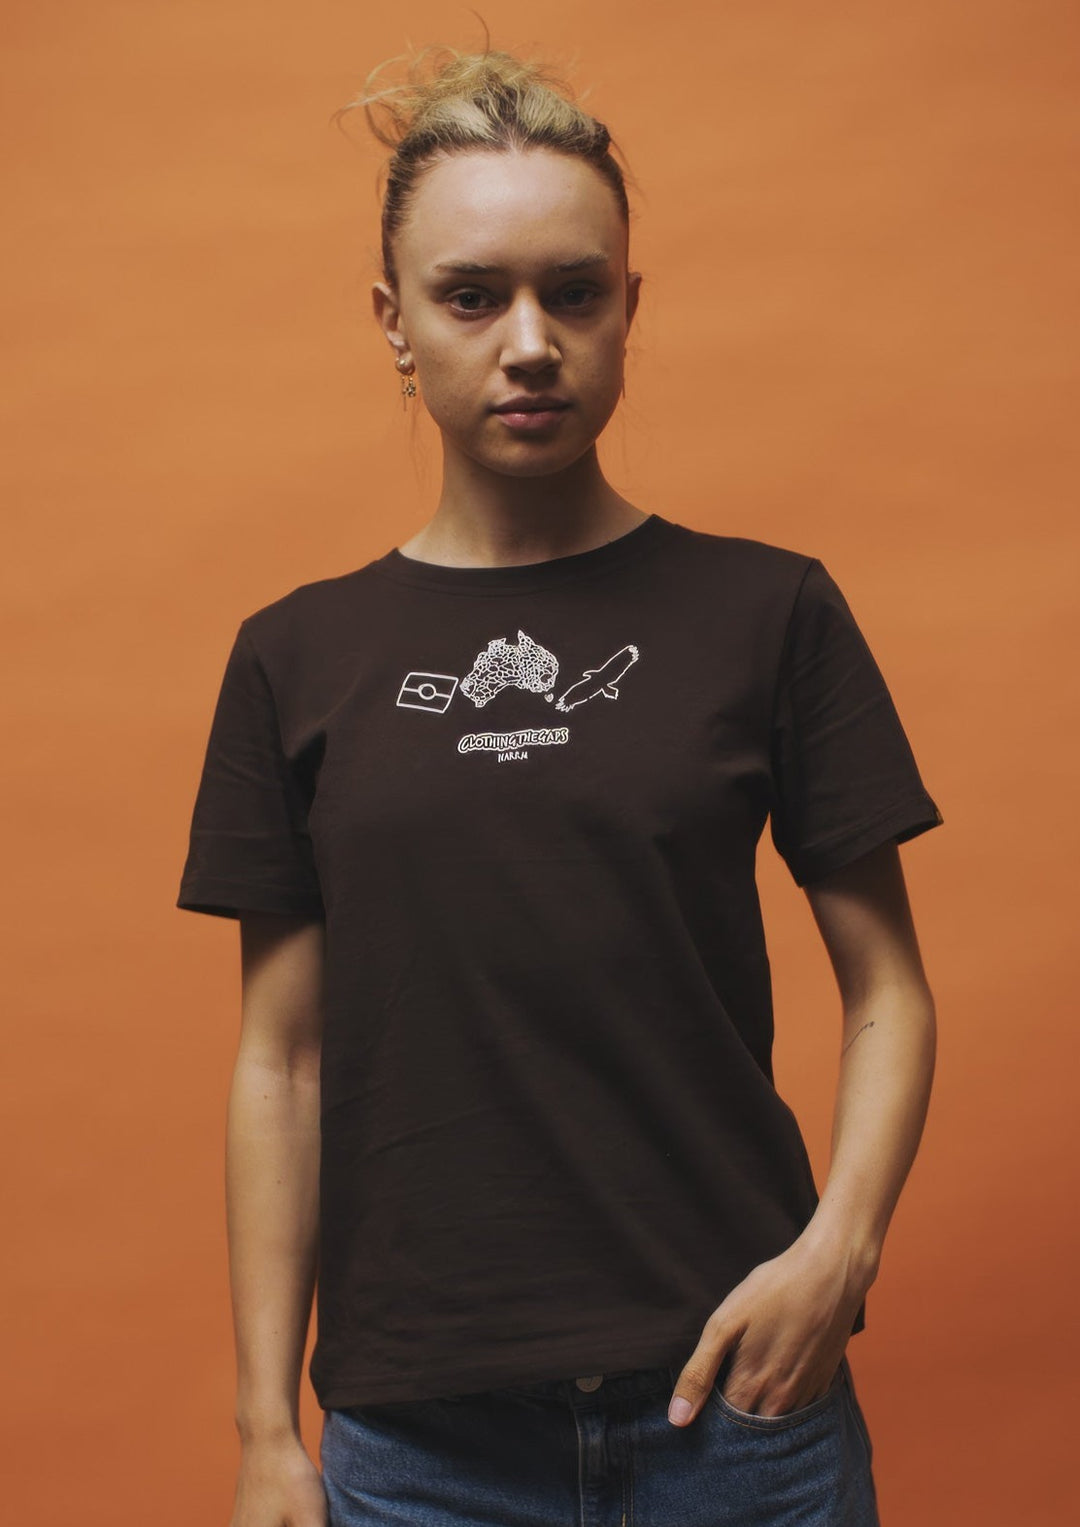 Clothing The Gaps. Icon Tee. Expresso dark brown tee featuring Aboriginal symbols of resistance and culture including a white outline of the Aboriginal flag, a white outlined decolonised map of “Australia” and a white outlined Bunjil, a well known wedge-tailed eagle - who is the spiritual creator and protector of the Kulin Nation in Victoria. These symbols are on the front of the tee across the chest.